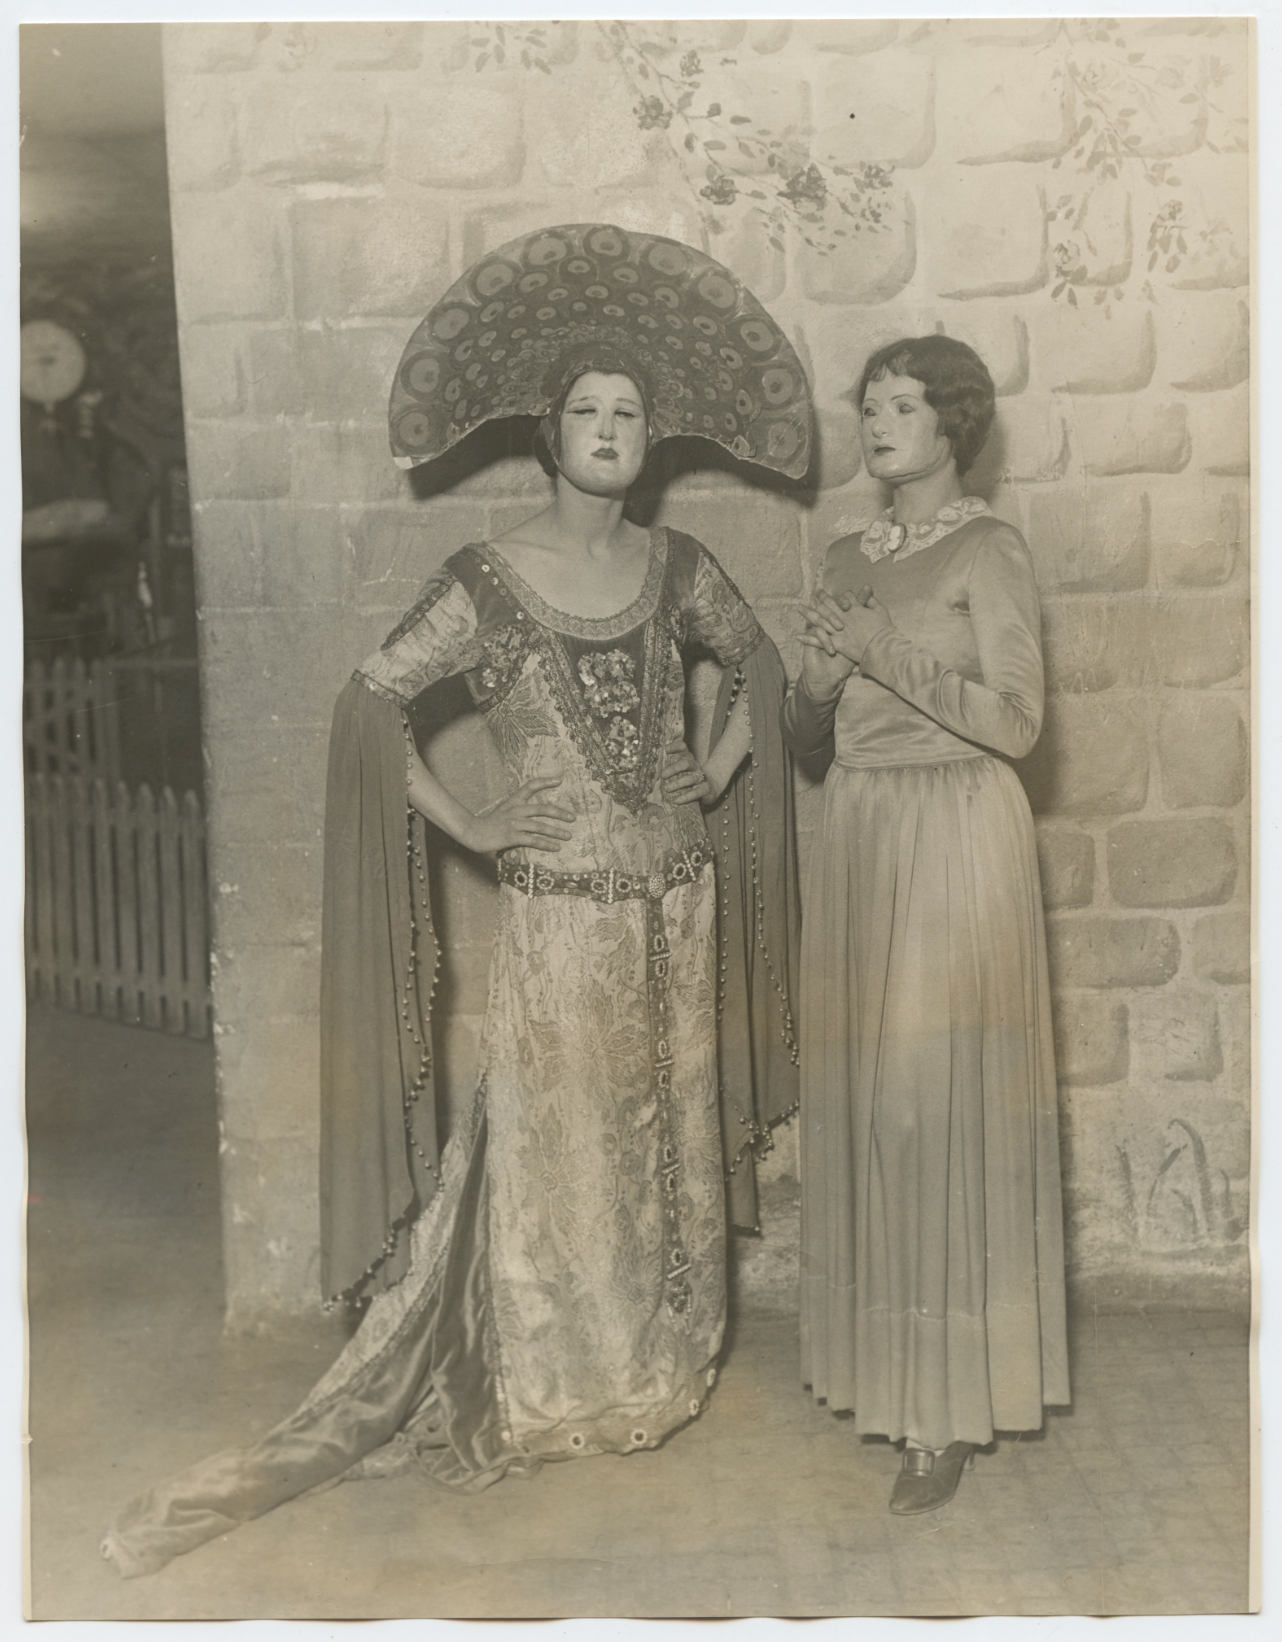 Benda, Wladyslaw T. (1873-1948) [Severn, Margaret. (1901-1997) & Hogarth, Leona: “Margaret Margaret Severn..first dancer to use a Benda Mask on the stage..and Leona Hogarth...in [Eugene O’Neill’s] ‘The Great God Brown’ ...the play of masks,” [NY], 1926